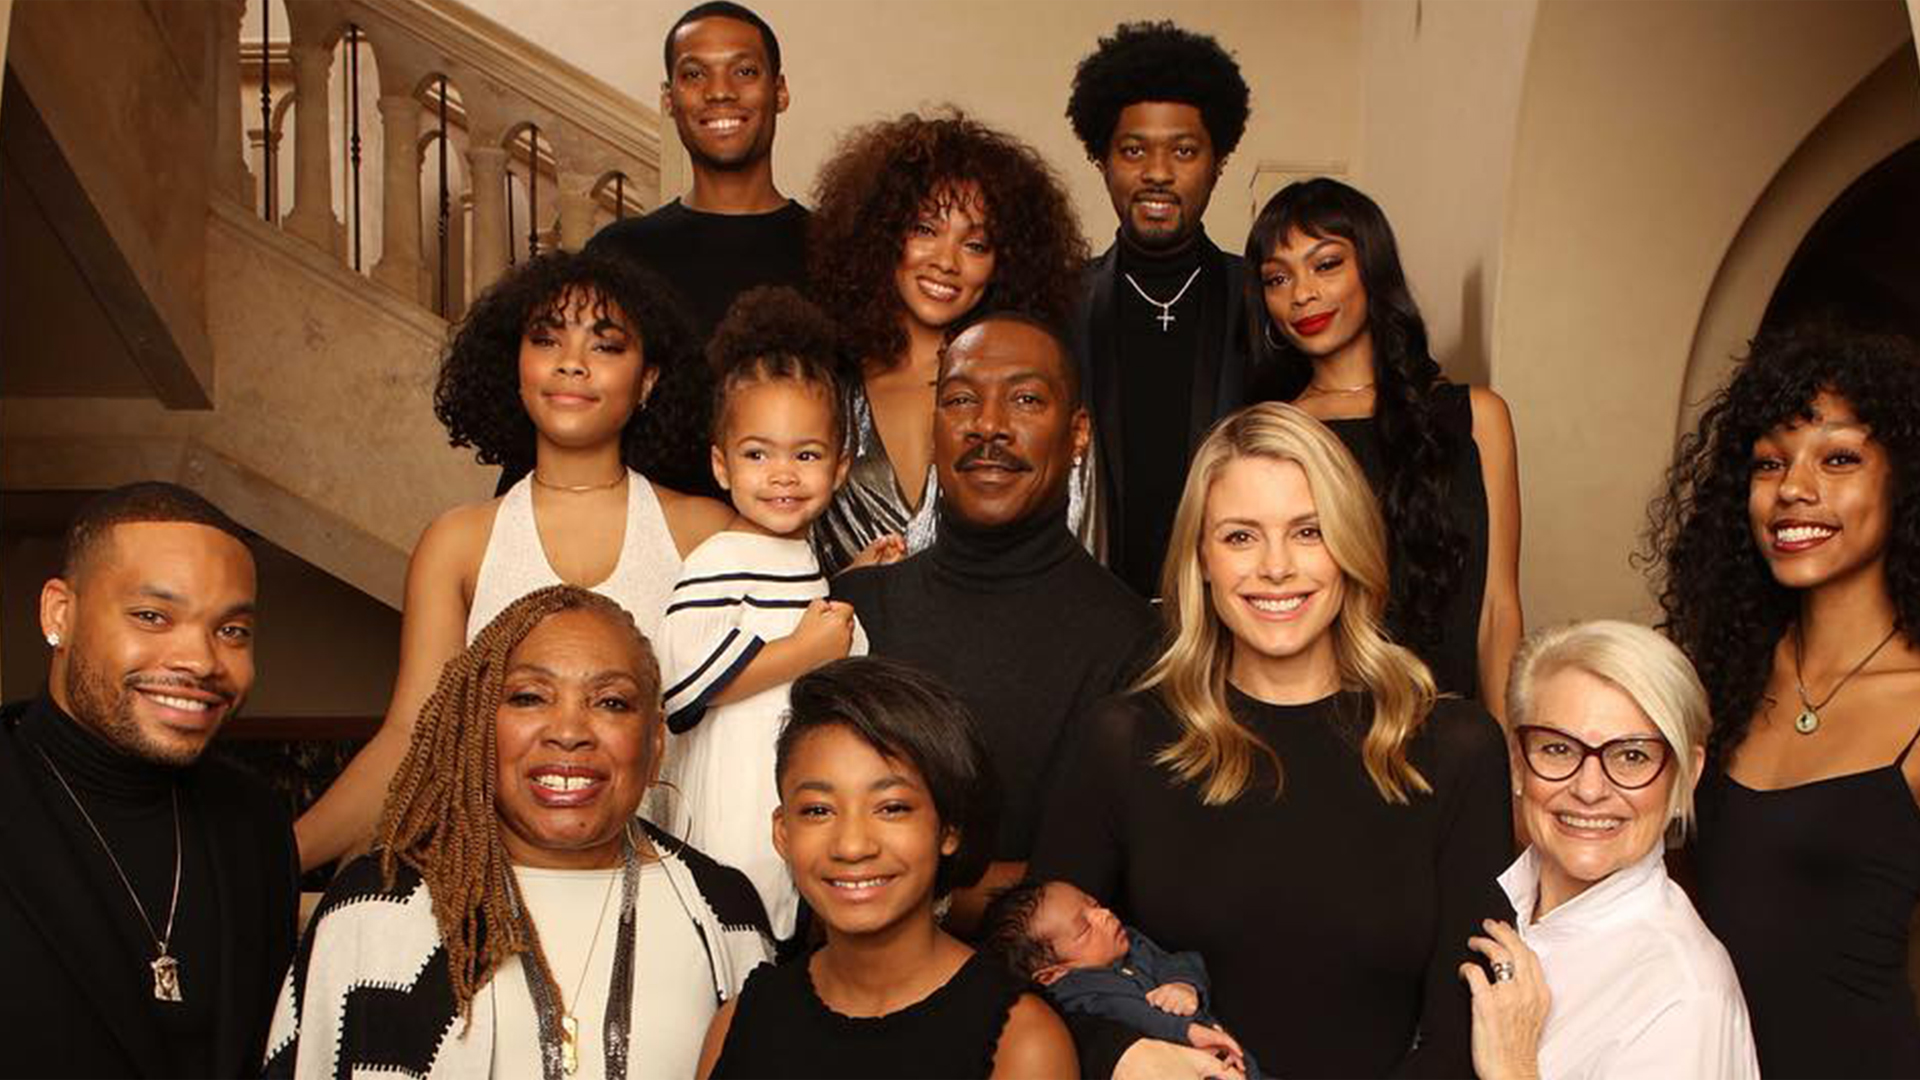 Eddie Murphy's The Legendary Funnyman With A $200M Fortune, But He's Also A Family Man Of Ten Kids